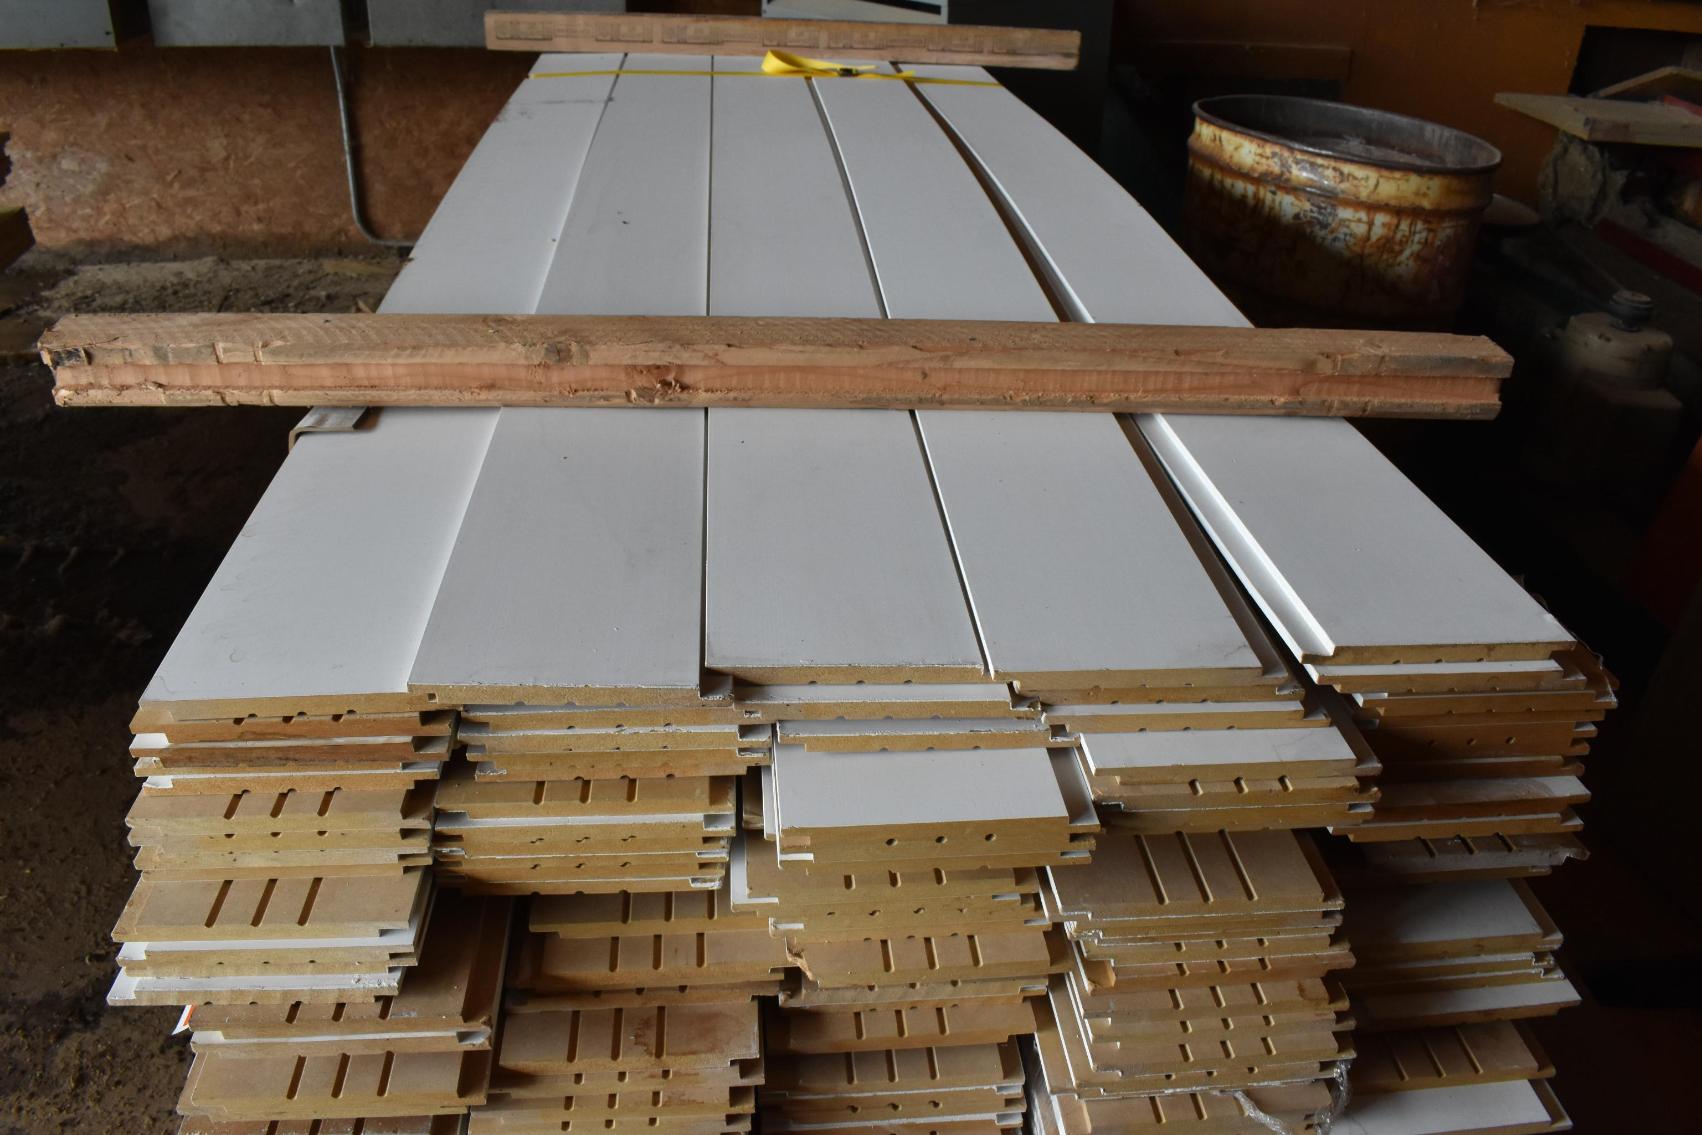 Lumber Yard Material: Trim, Fencing, Tongue and Groove, Lumber, Roof Vents, Doors